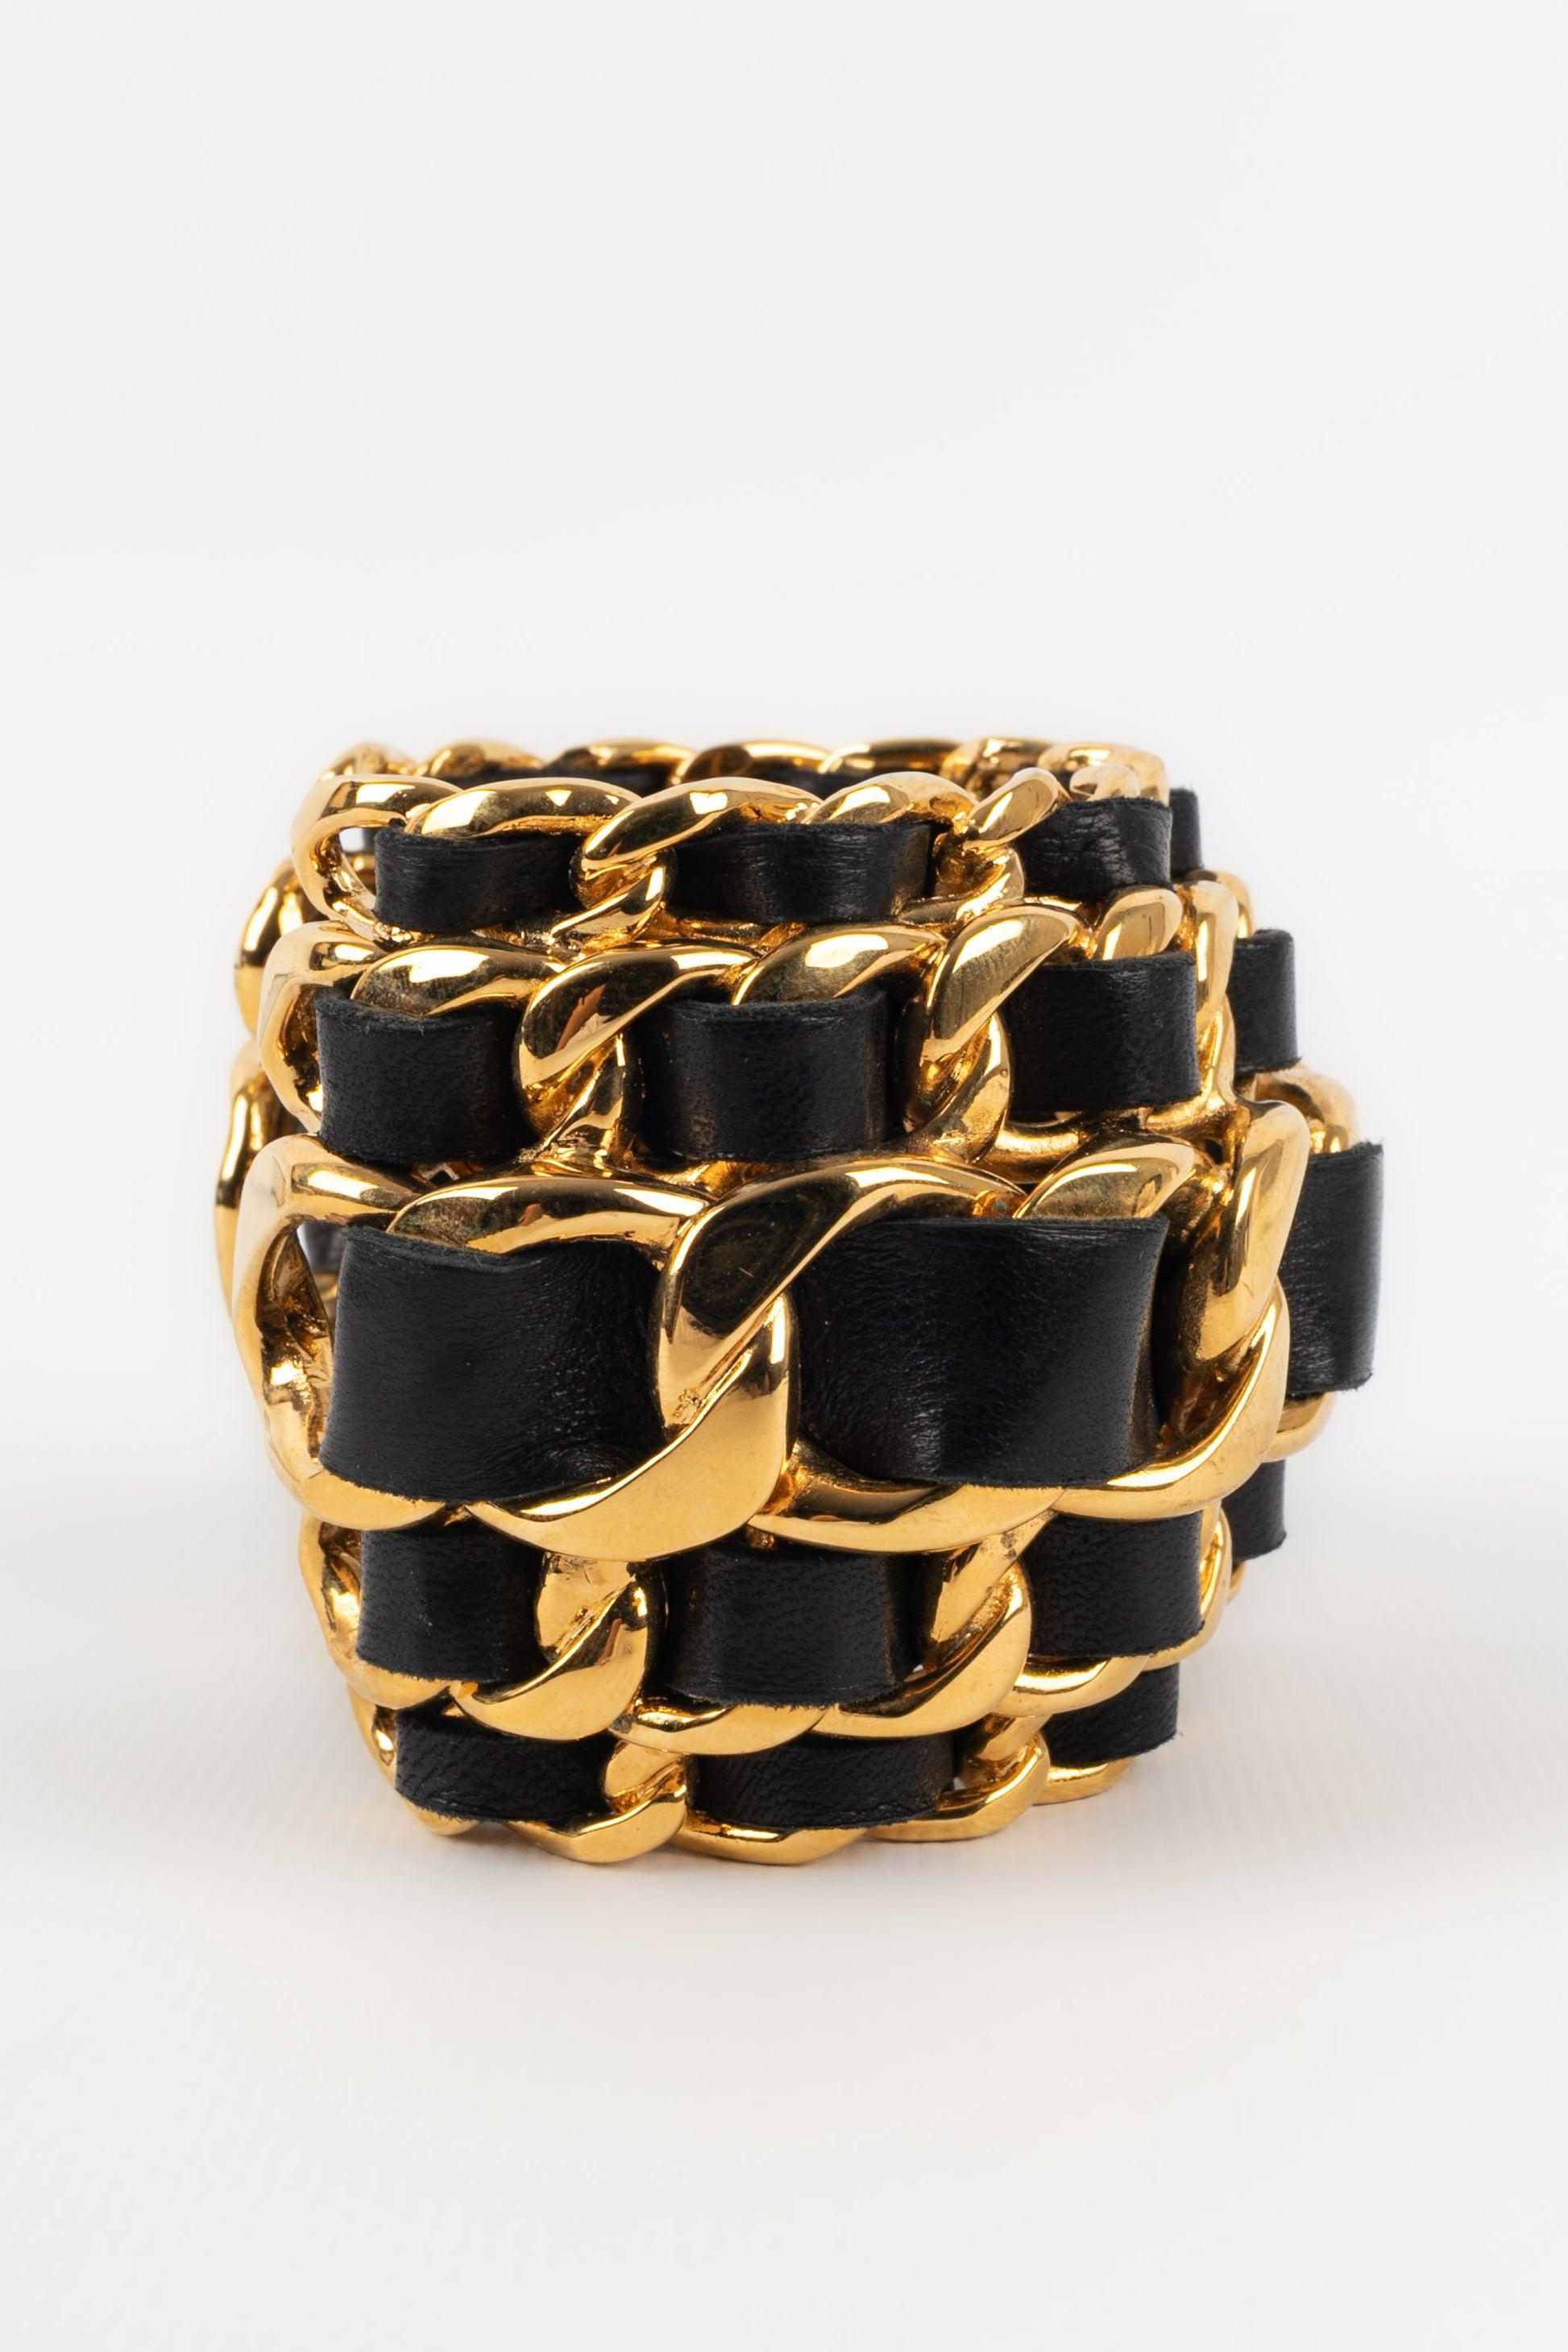 Chanel Golden Metal and Leather Cuff Bracelet with Chains, 1991 2